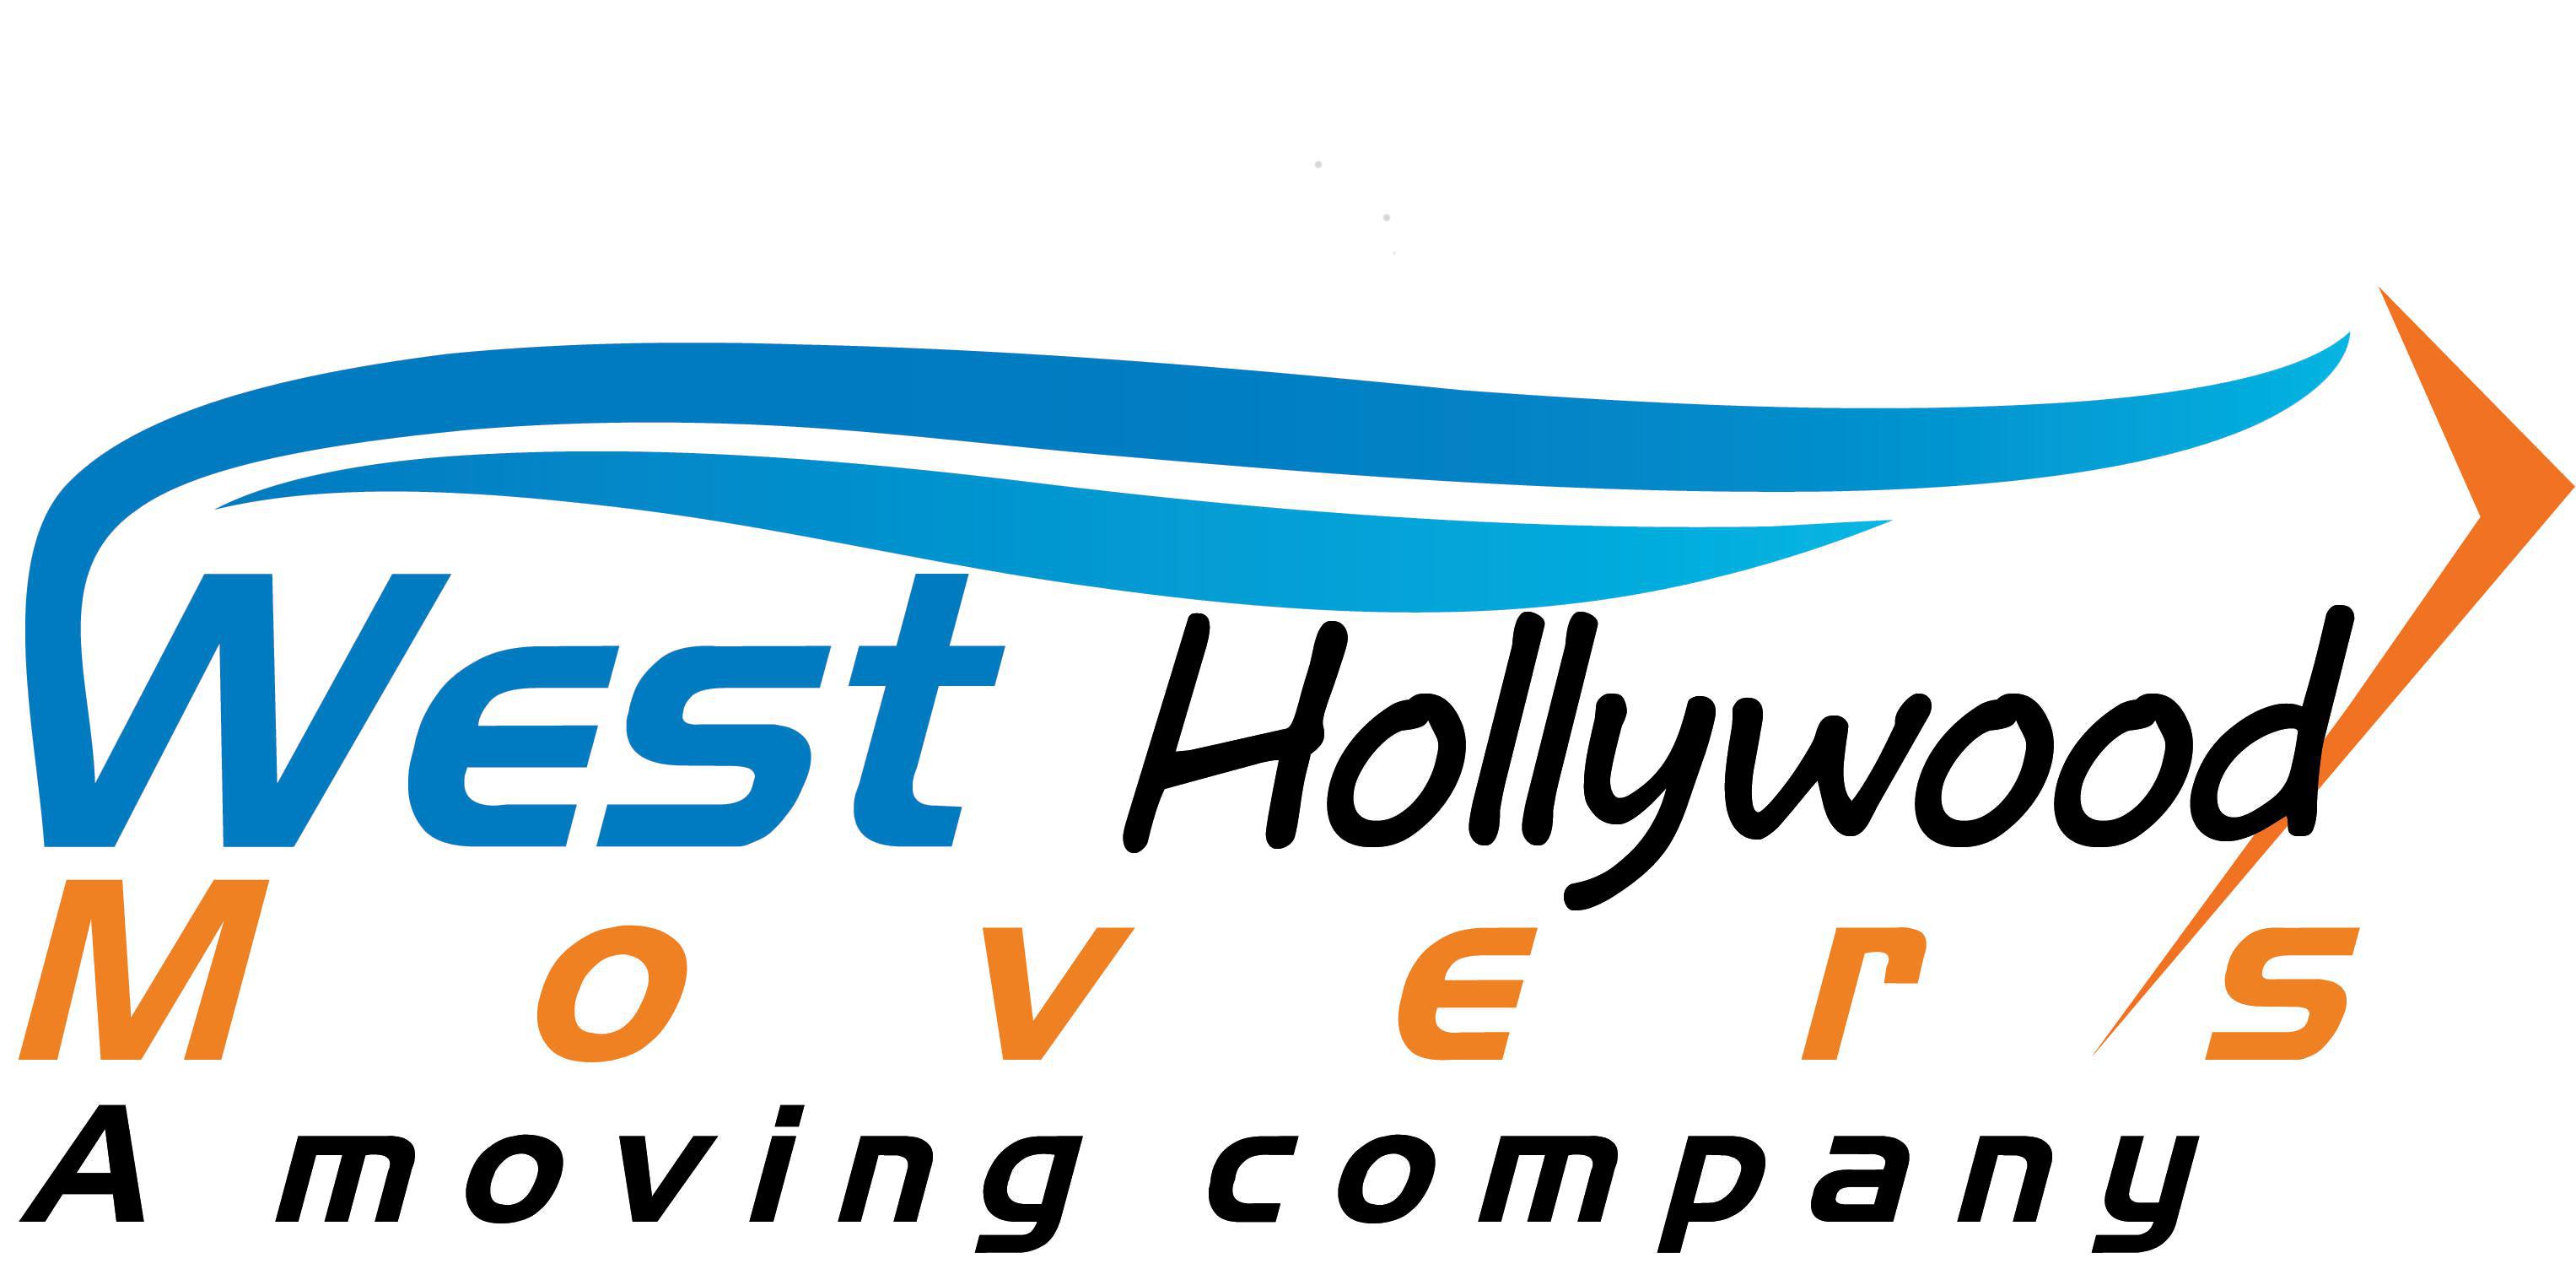 West Hollywood Movers logo